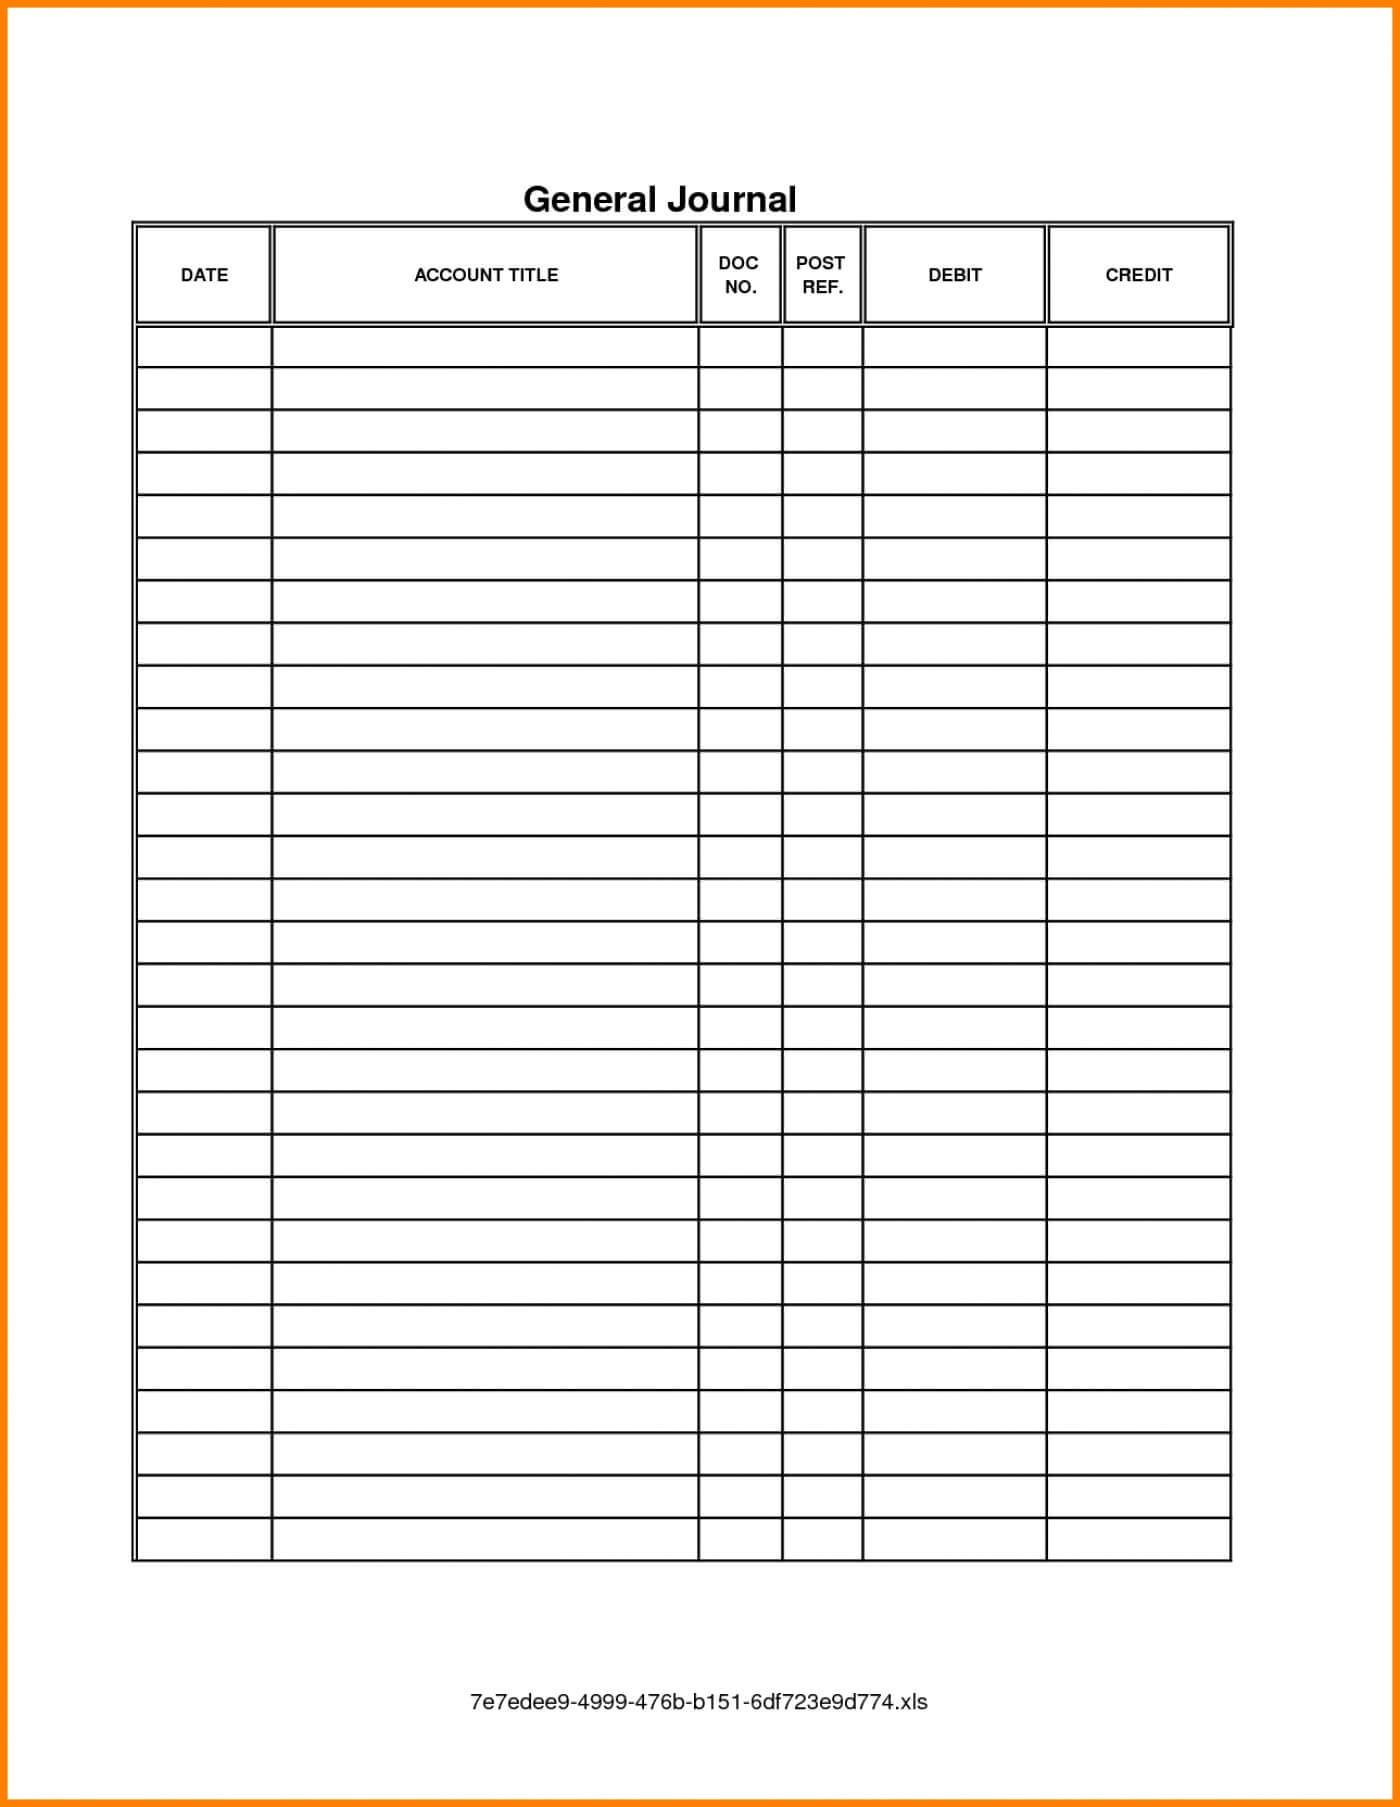 027 Accounting Journal Entry Template Excel Or Double Lovely Throughout Double Entry Journal Template For Word